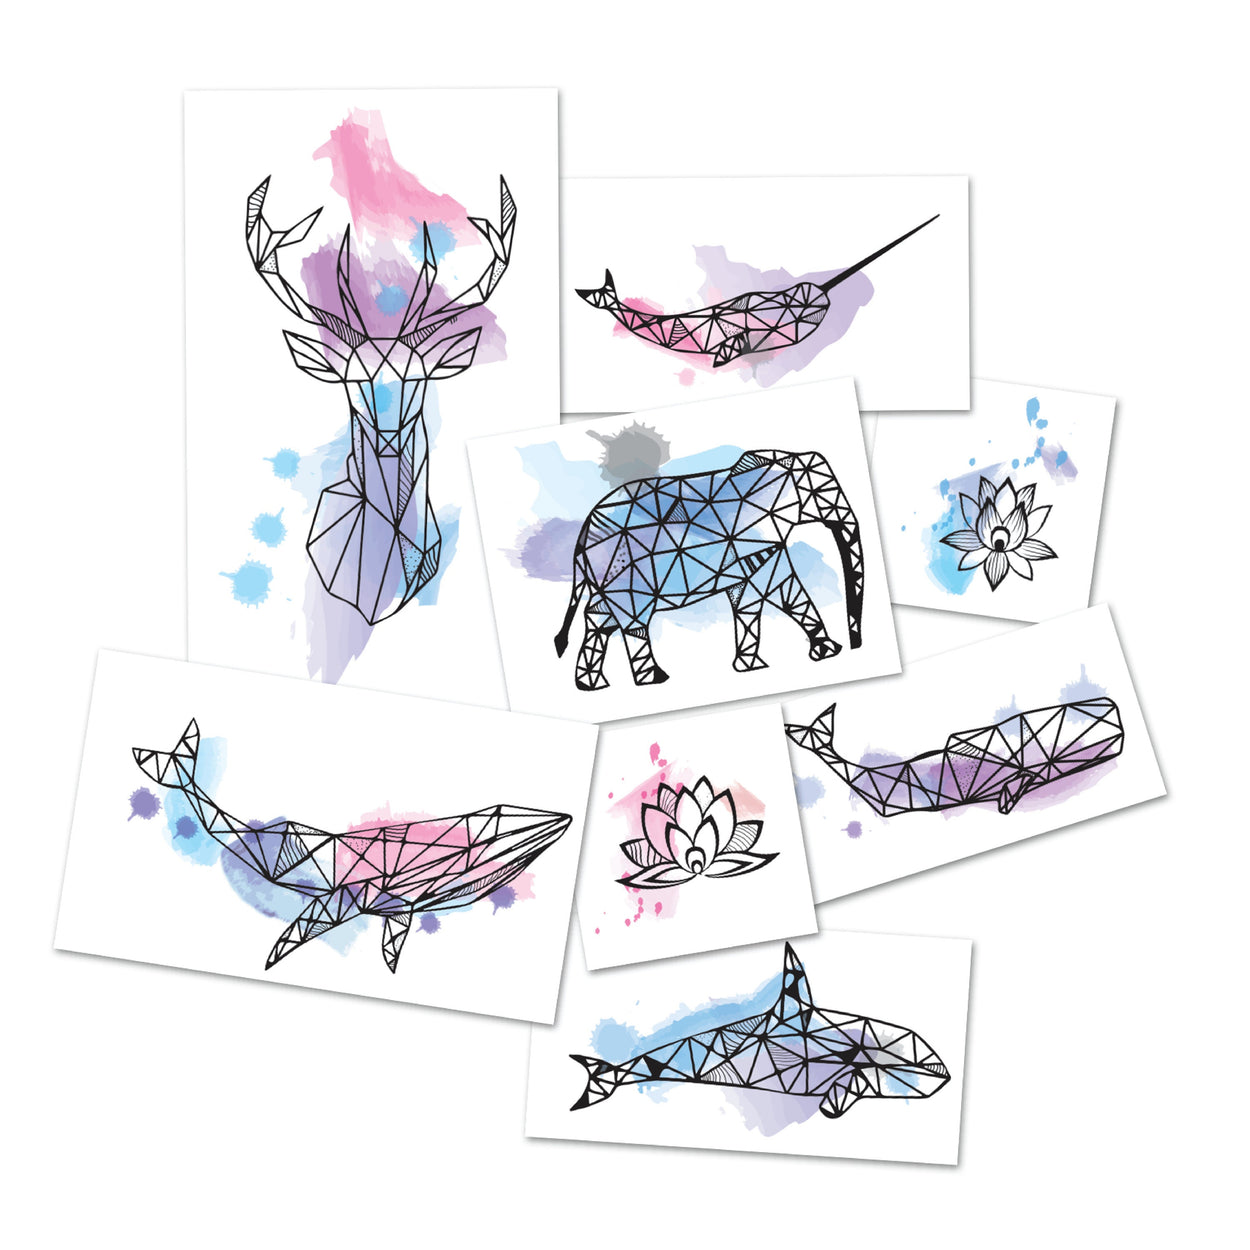 Collection of Geometric Tattoos | Watercolor animals, whales and lotus, 2 sets of 8 unique temporary tattoos